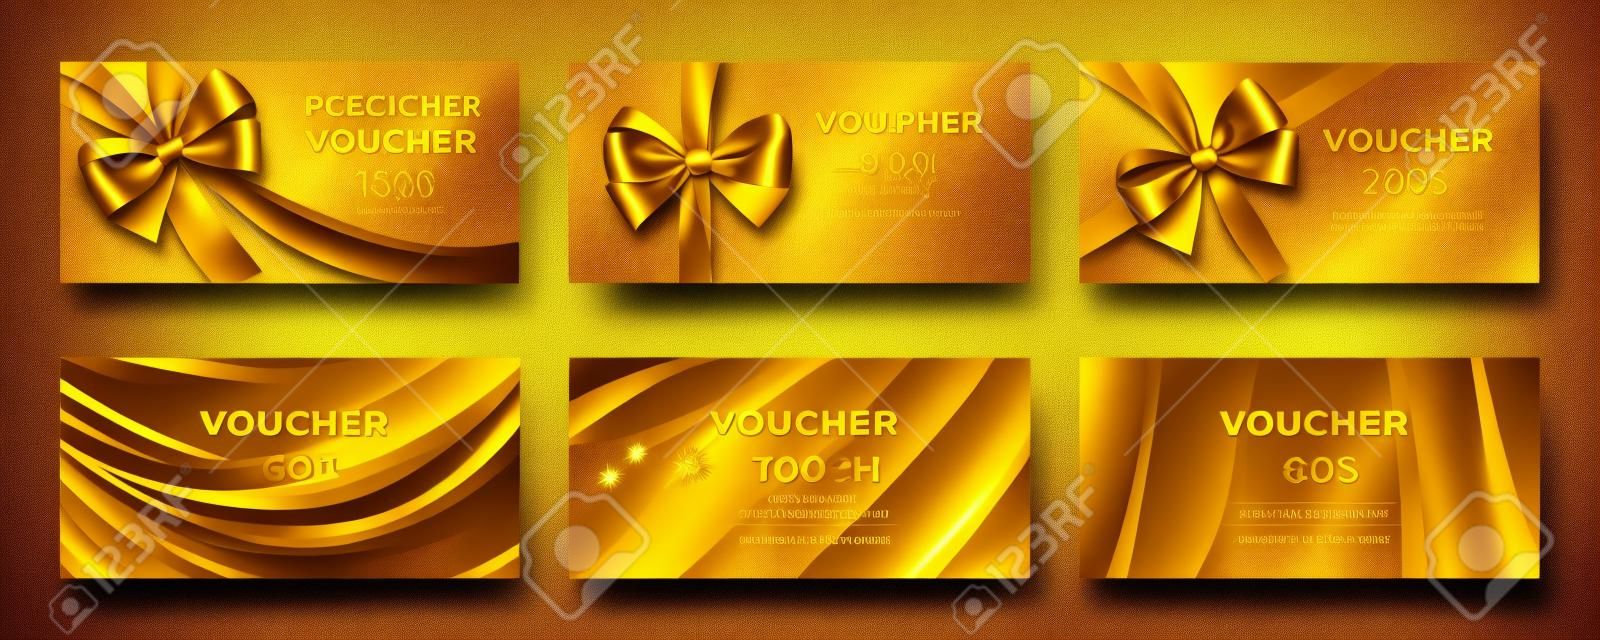 Golden voucher or red gift card, gold certificate for discount. Set of isolated template for present coupon with ribbon and bow. Shop invitation promo or flyer offer, birthday gift. Premium label